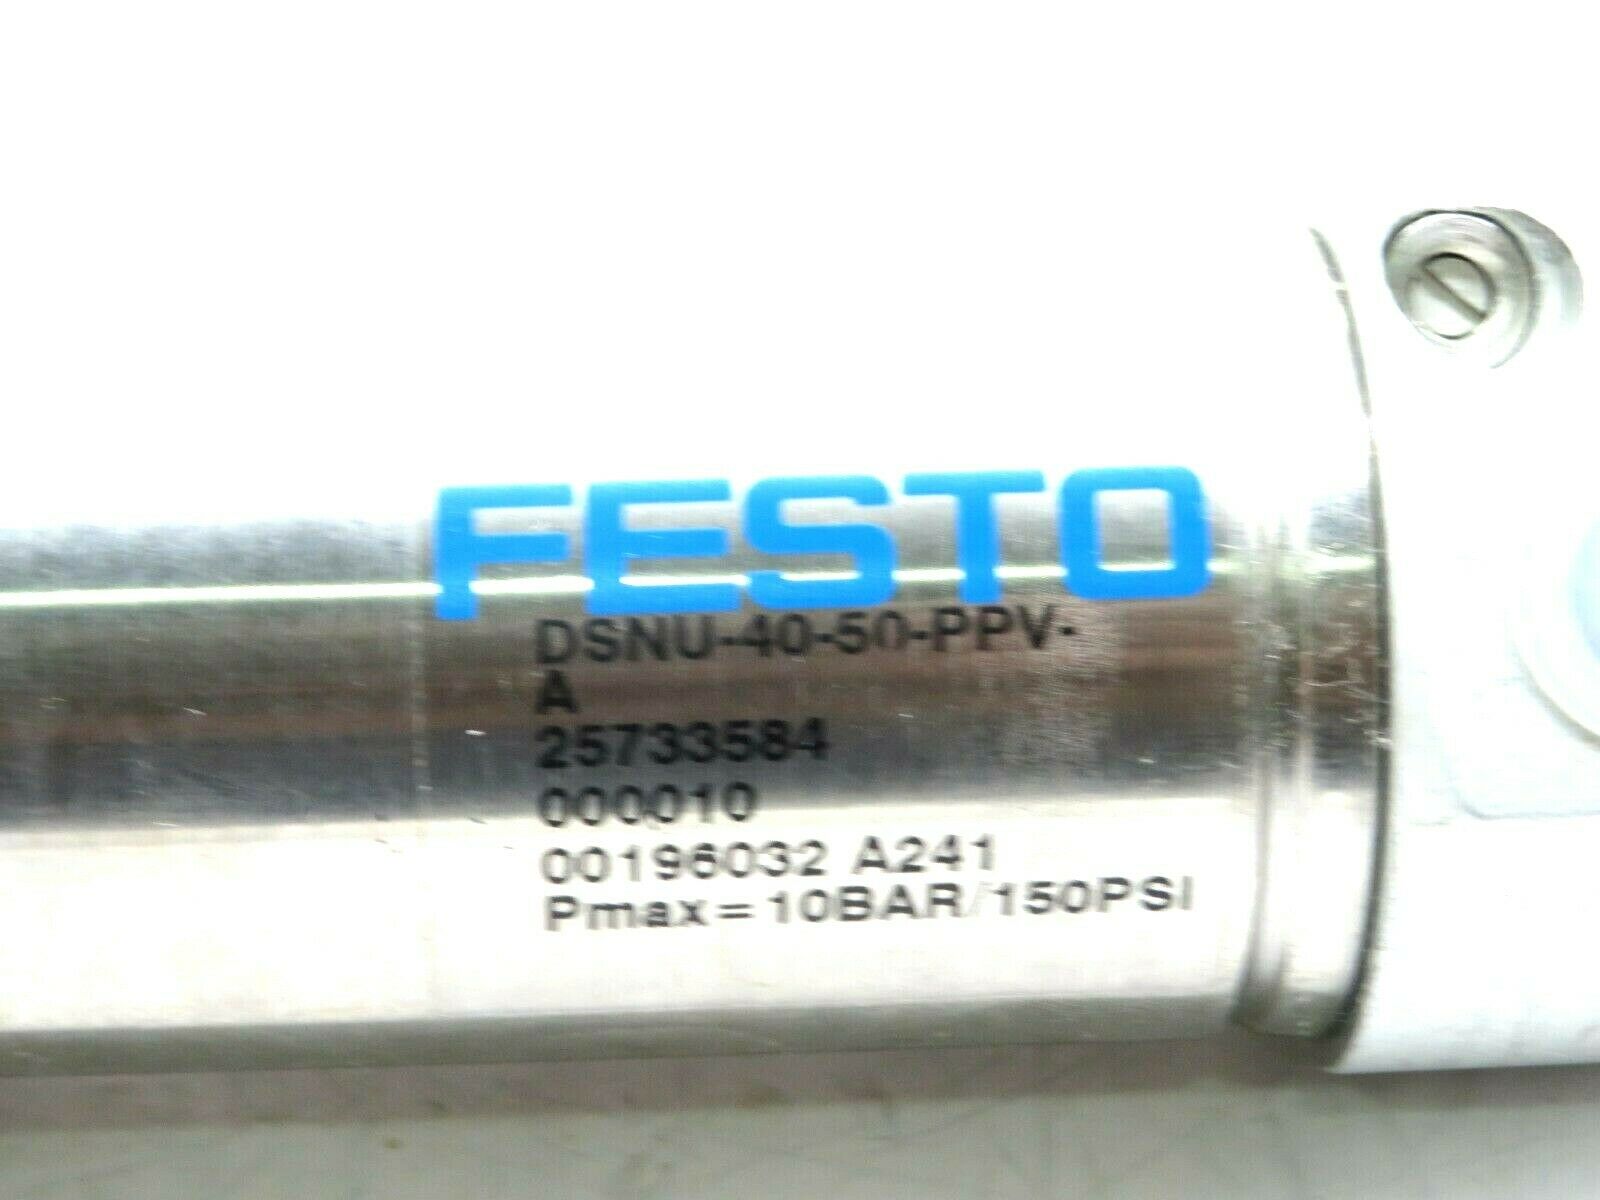 DSNU 50 50 P  FESTO.......CYLINDER ..............PART 193994 NEW  PACKAGED 